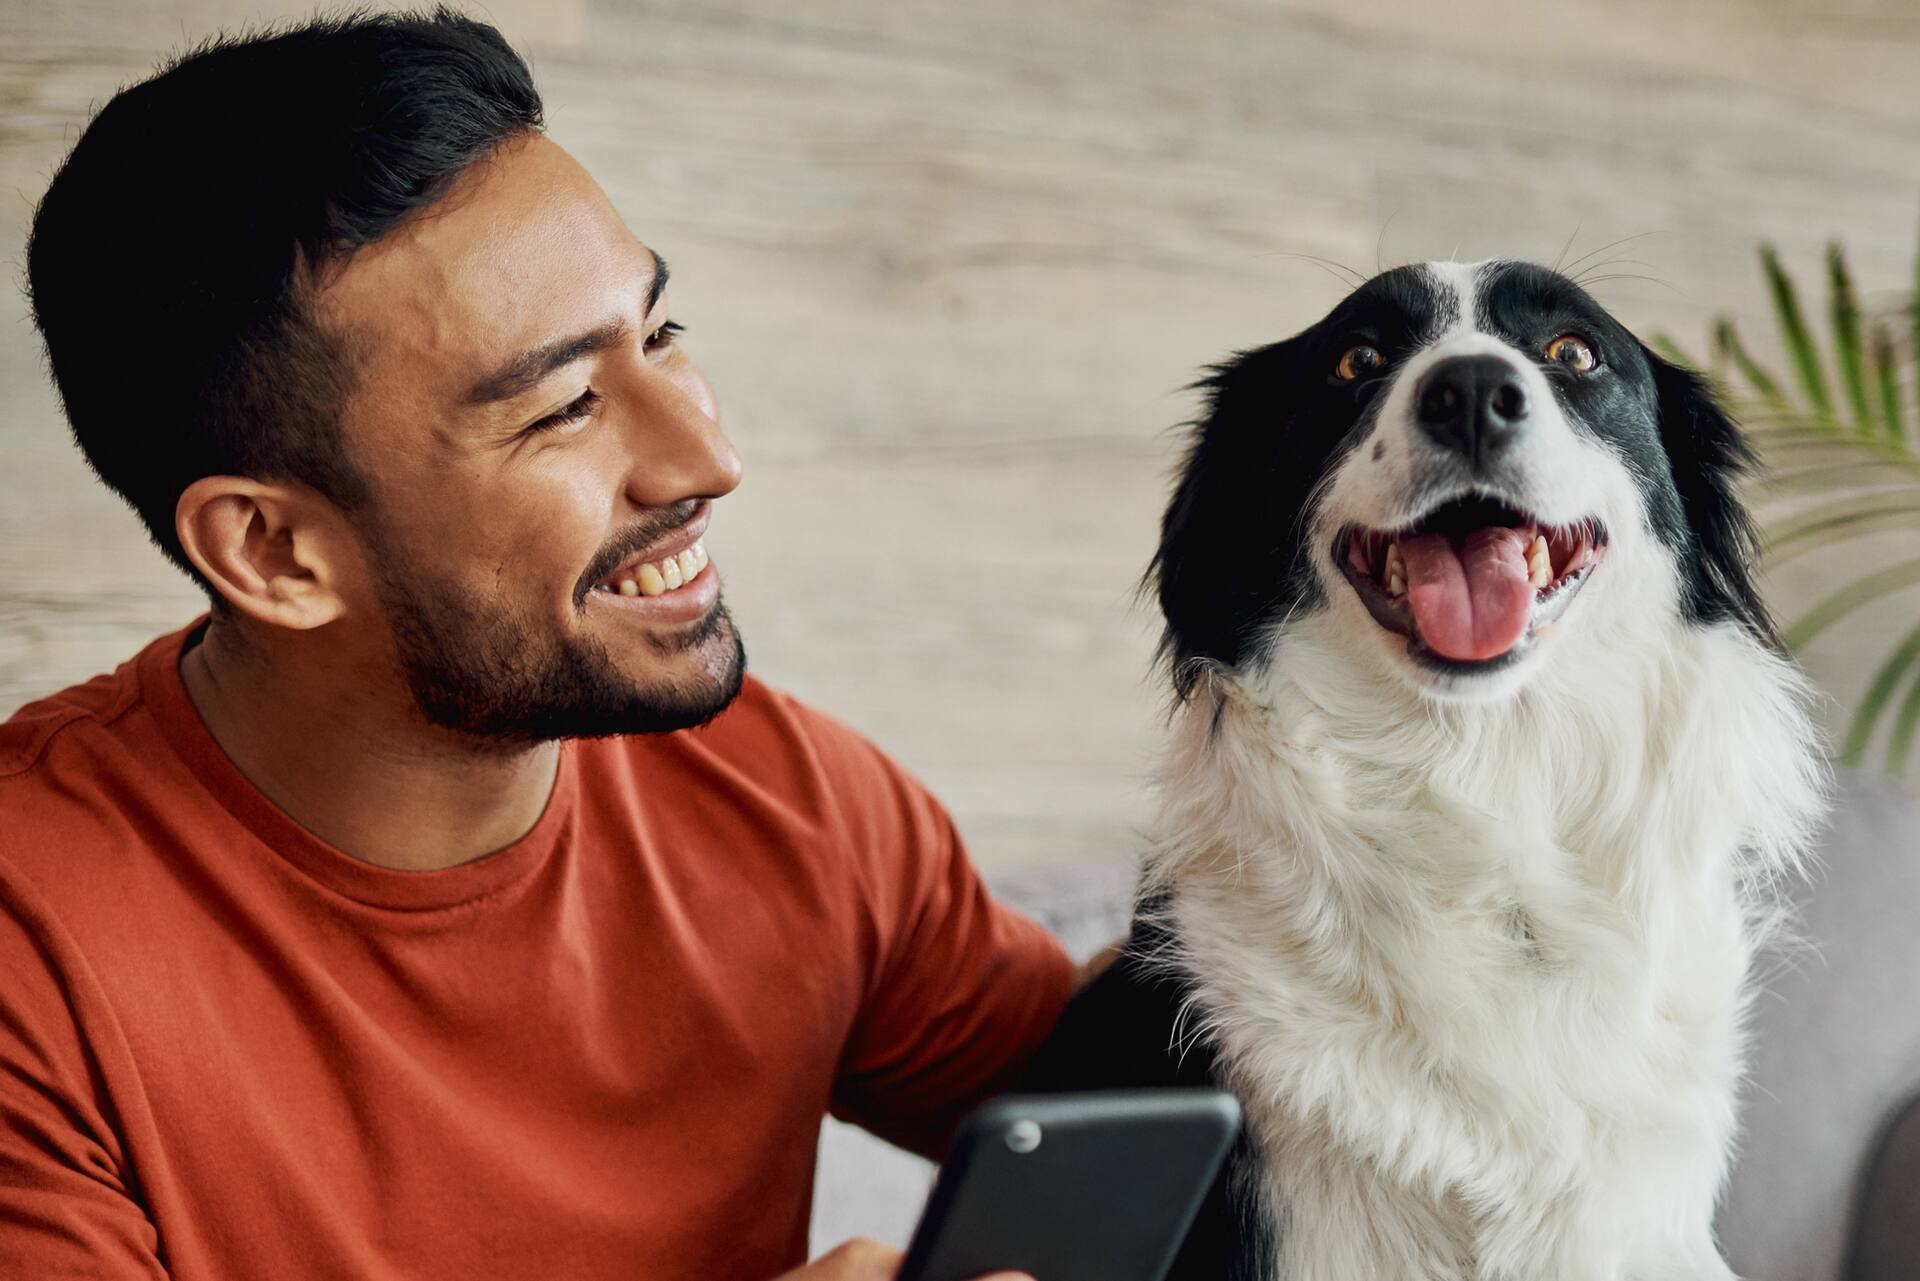 Man in orange t-shirt with phone and black and white dog